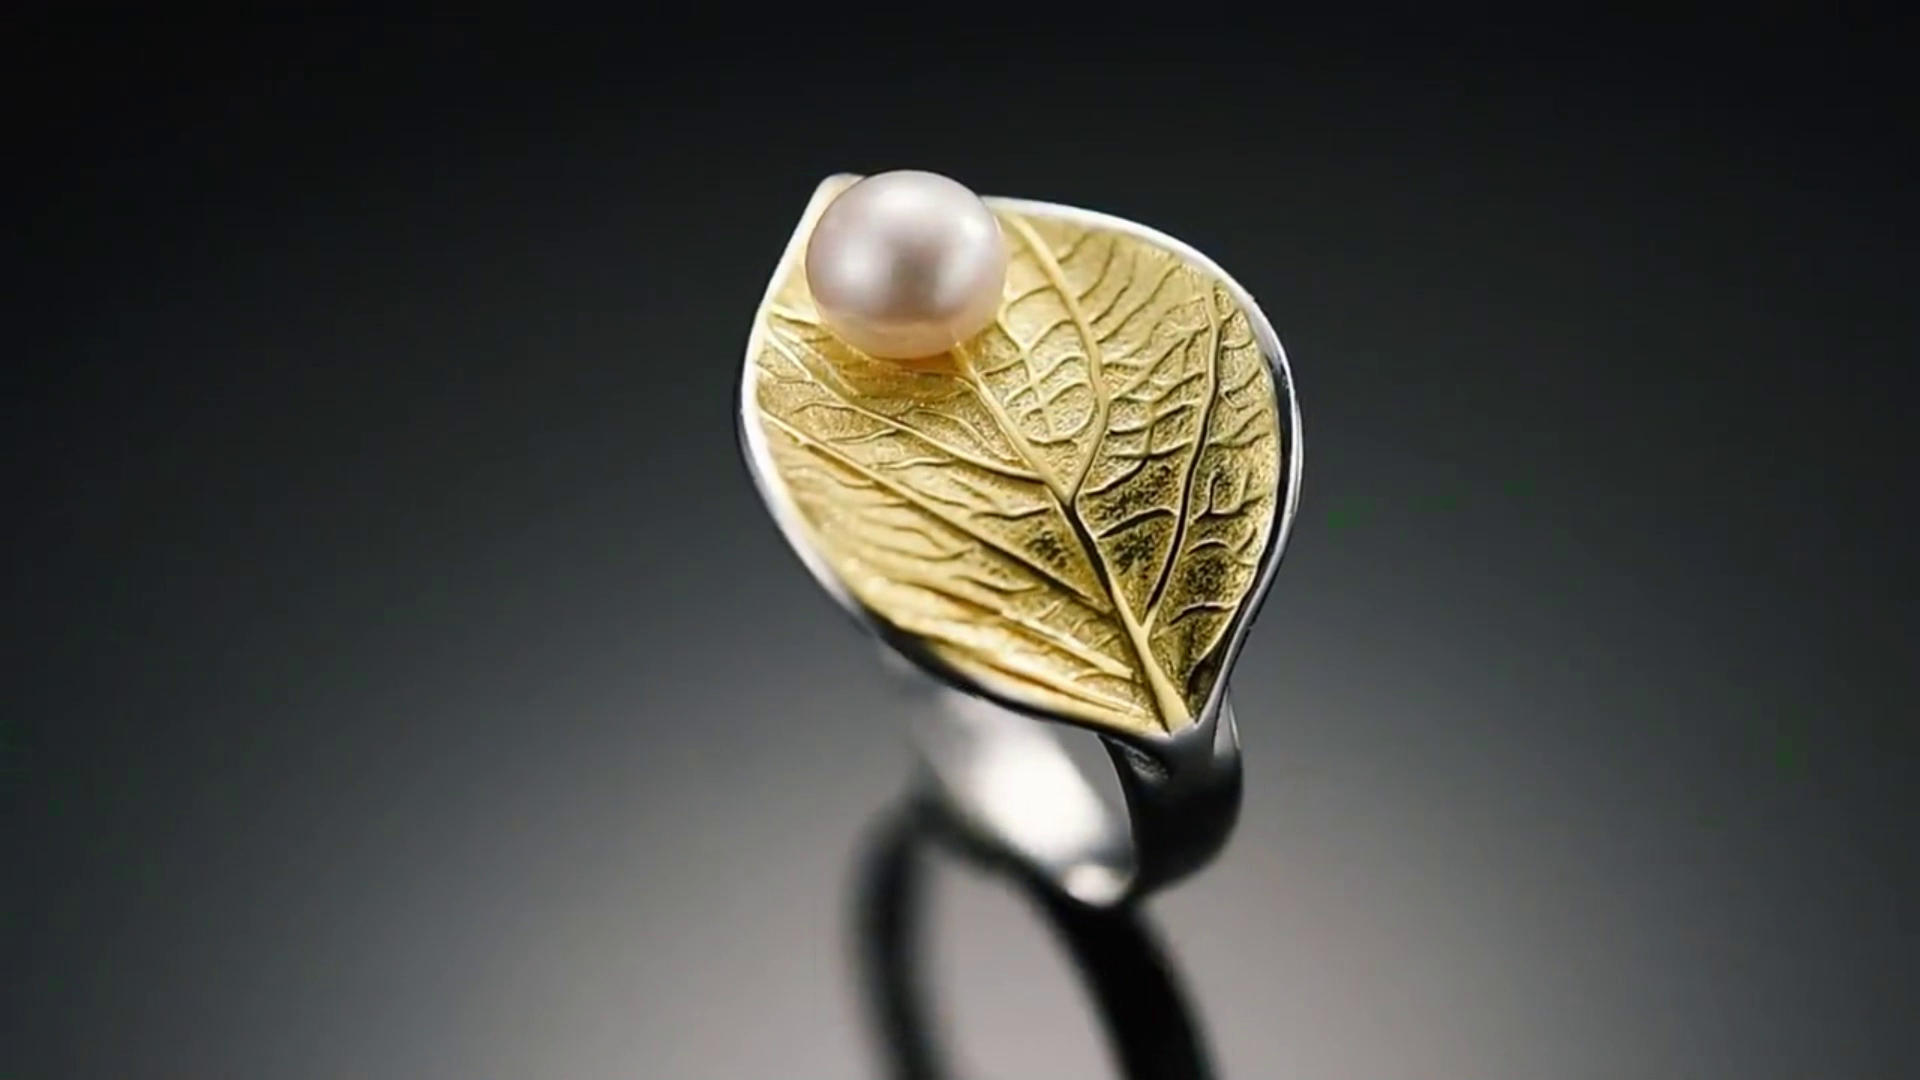 "S925 Freshwater Pearl Leaf Shaped Ring"